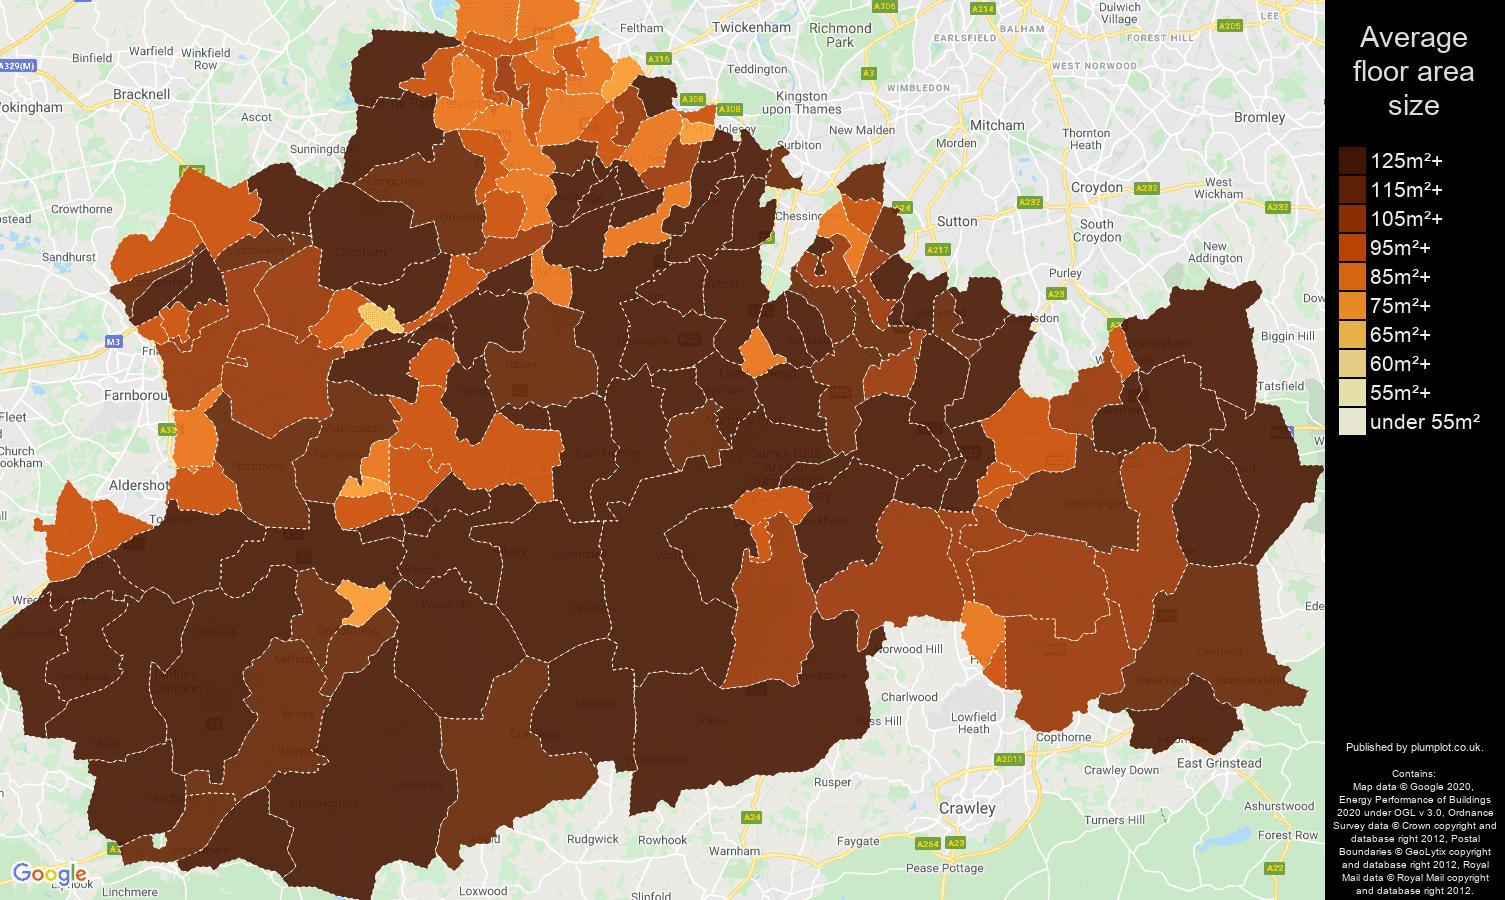 Surrey map of average floor area size of houses